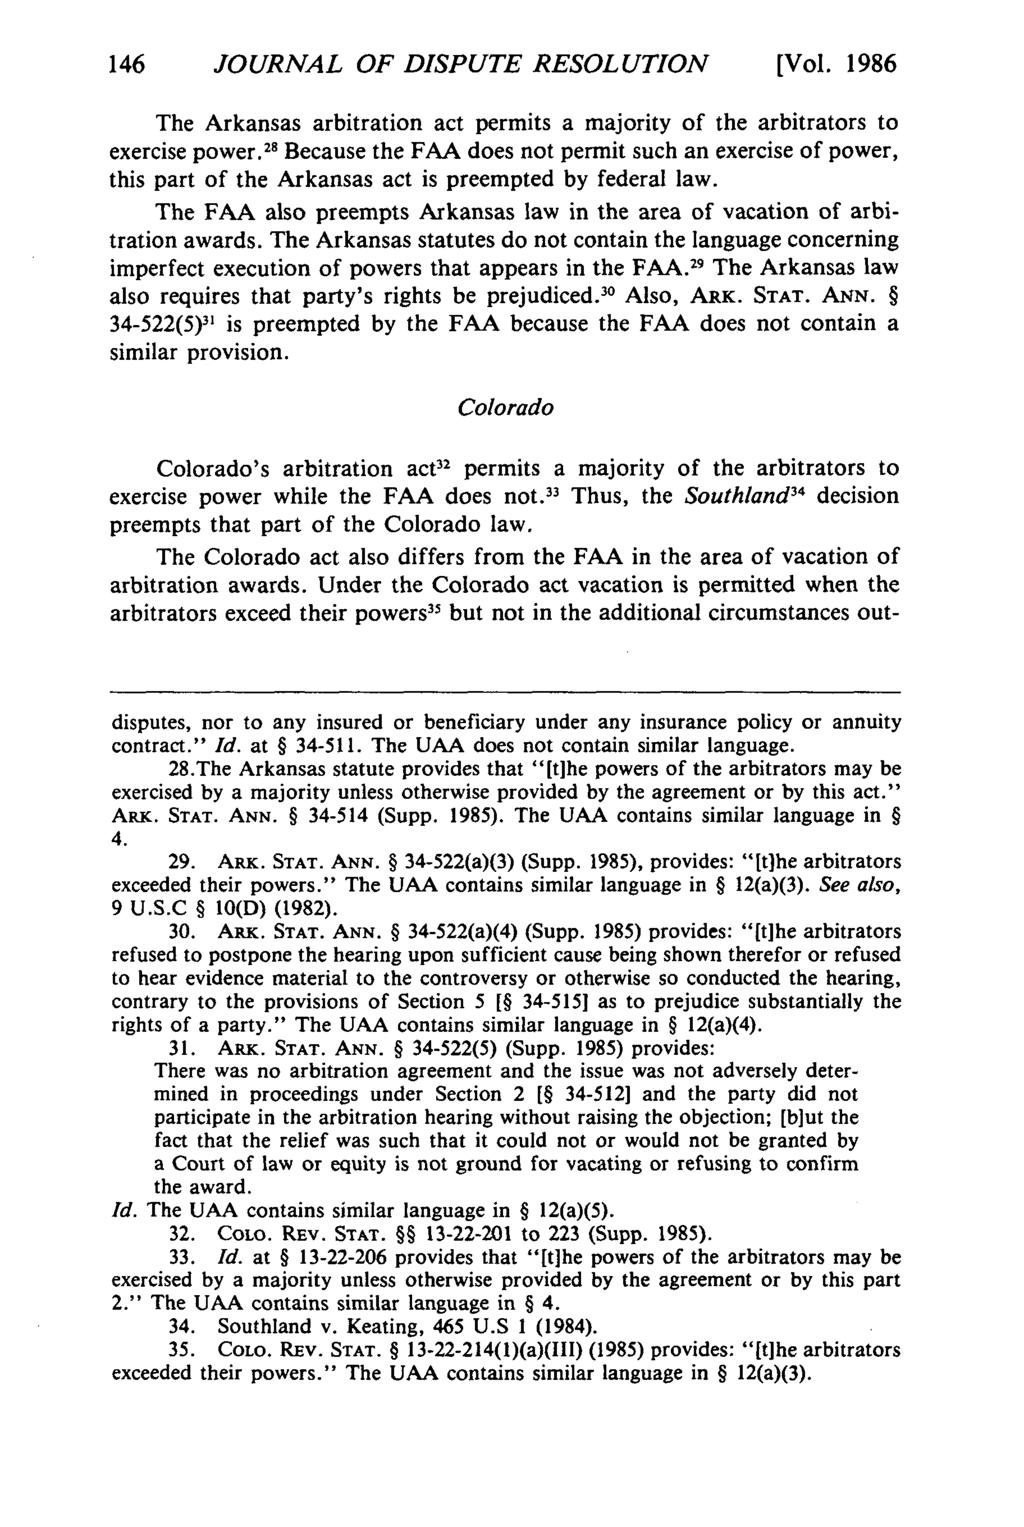 146 JOURNAL Journal of Dispute OF DISPUTE Resolution, Vol. RESOLUTION 1986, Iss. [1986], Art. 12 [Vol. 1986 The Arkansas arbitration act permits a majority of the arbitrators to exercise power.